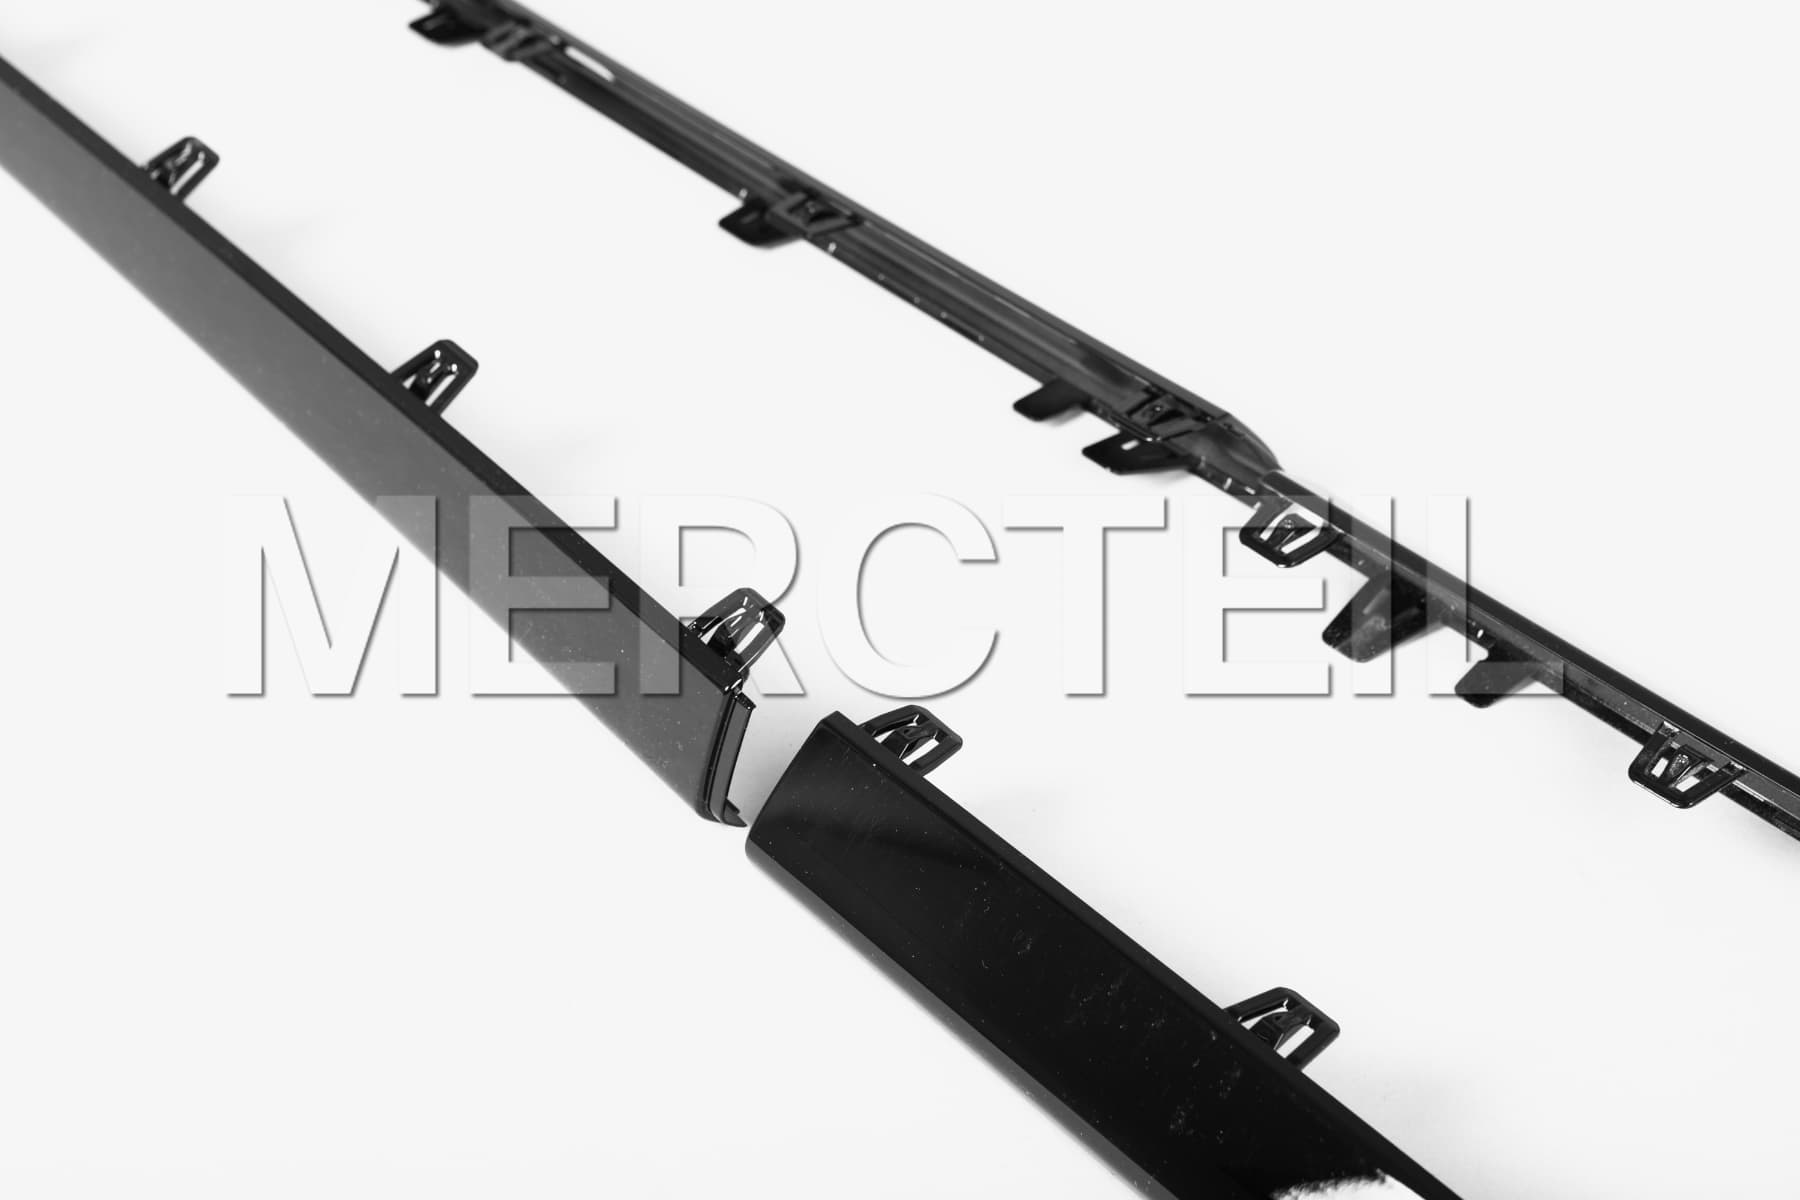 GLC63 AMG Night Package Side Skirts Molding Kit for GLC Class C/X253 Genuine Mercedes-AMG (Part number: A2536986200)